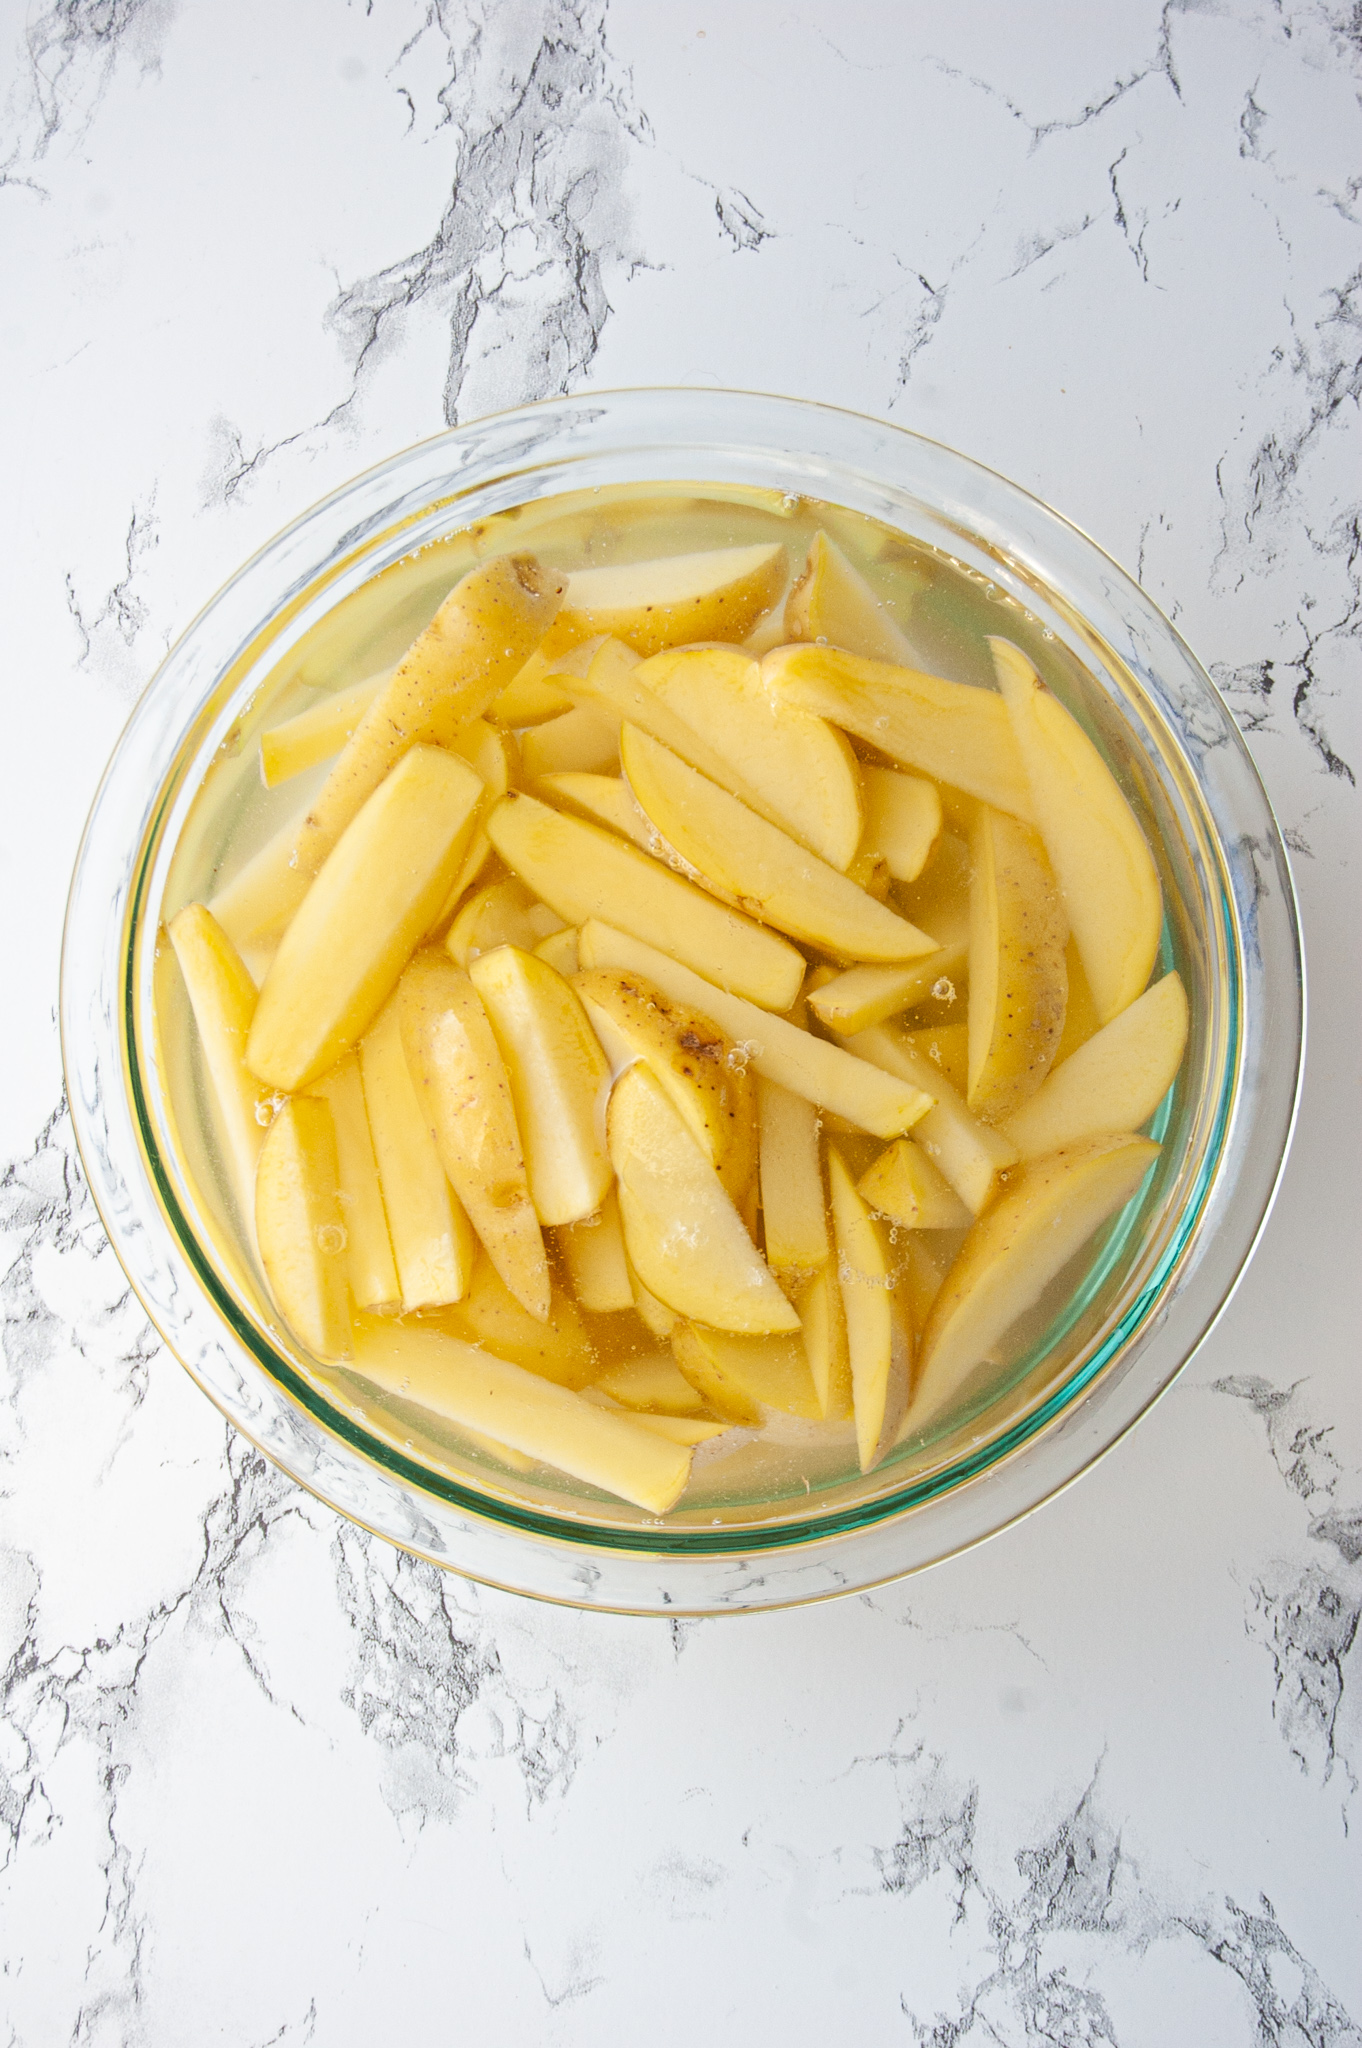 Sliced potatoes soaking in a bowl of water for french fries